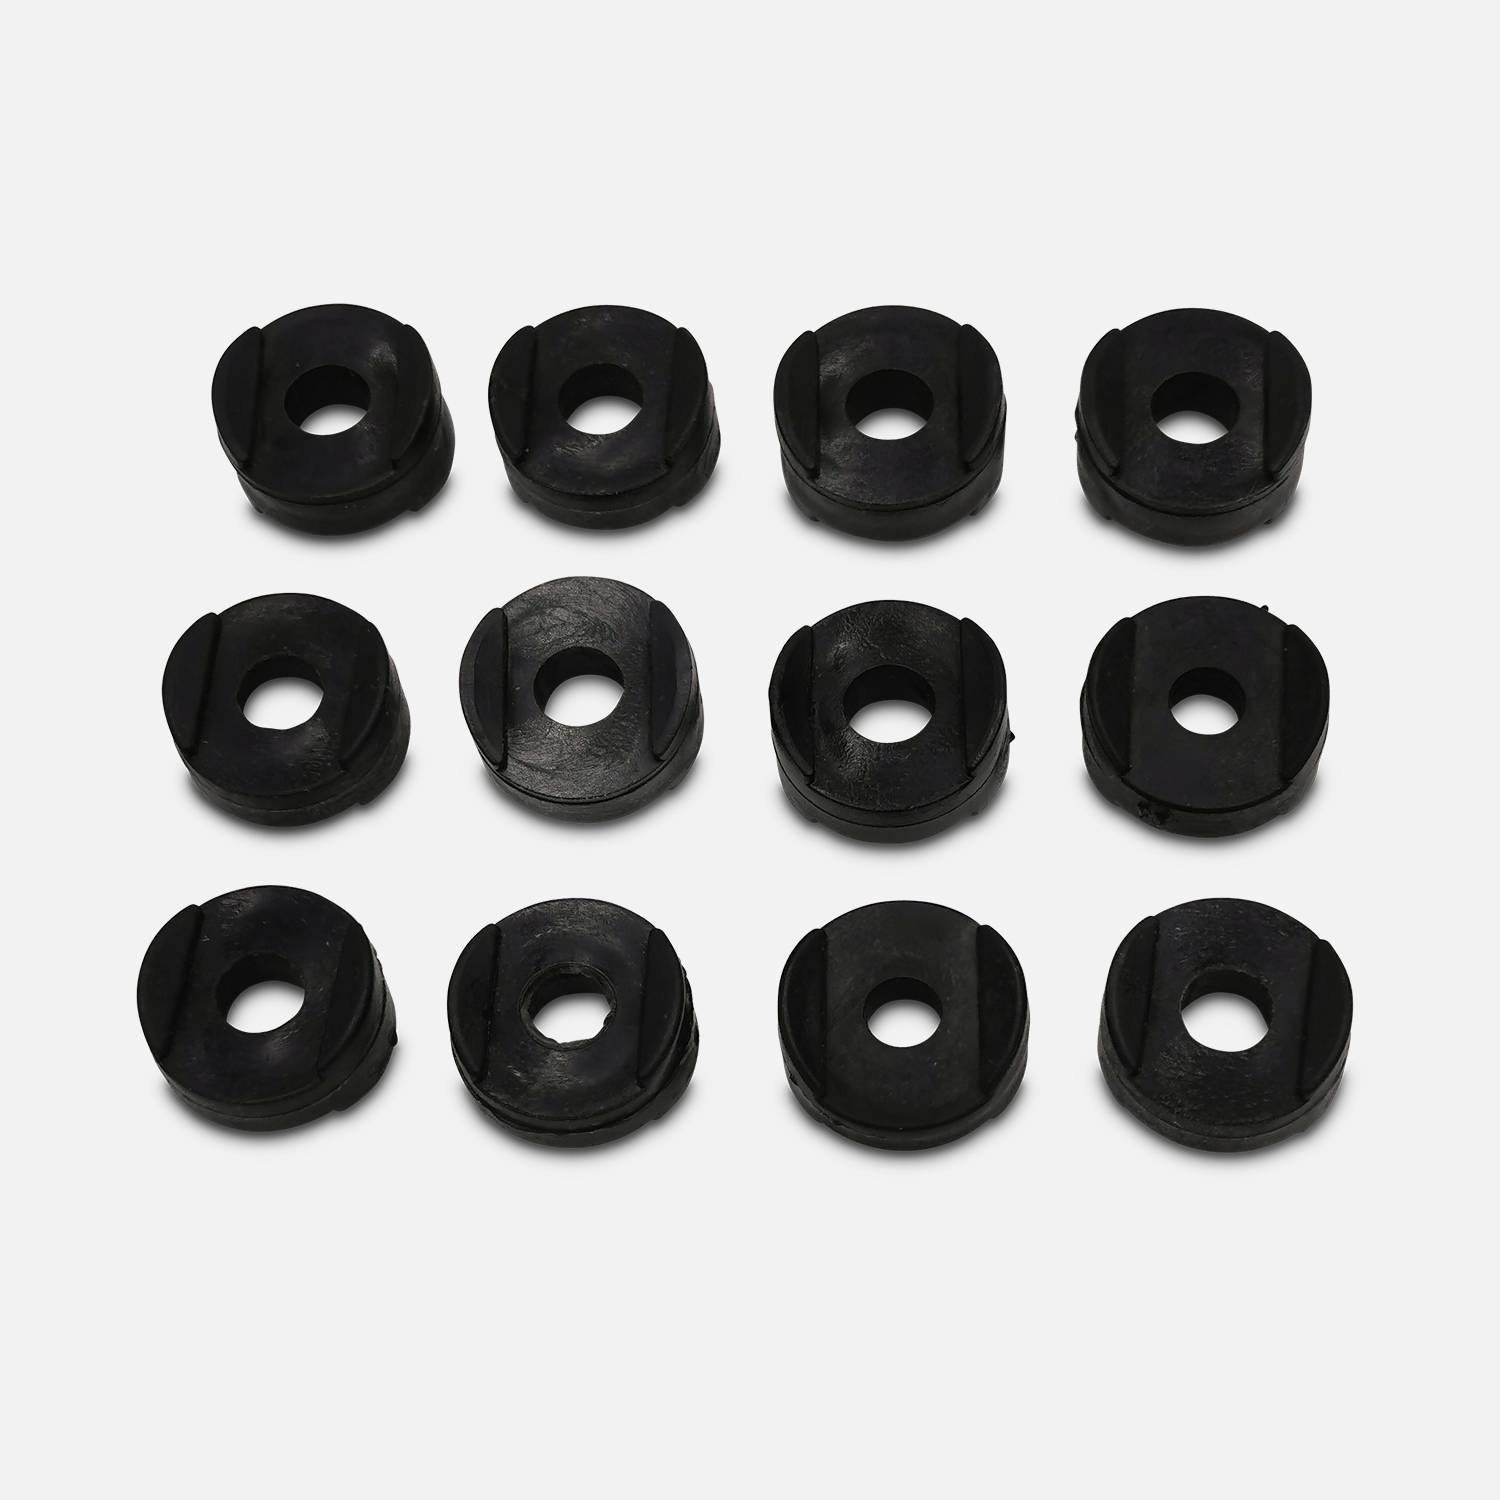 Set of 12 spacers for trampolines, for outdoor and indoor net trampolines Photo1